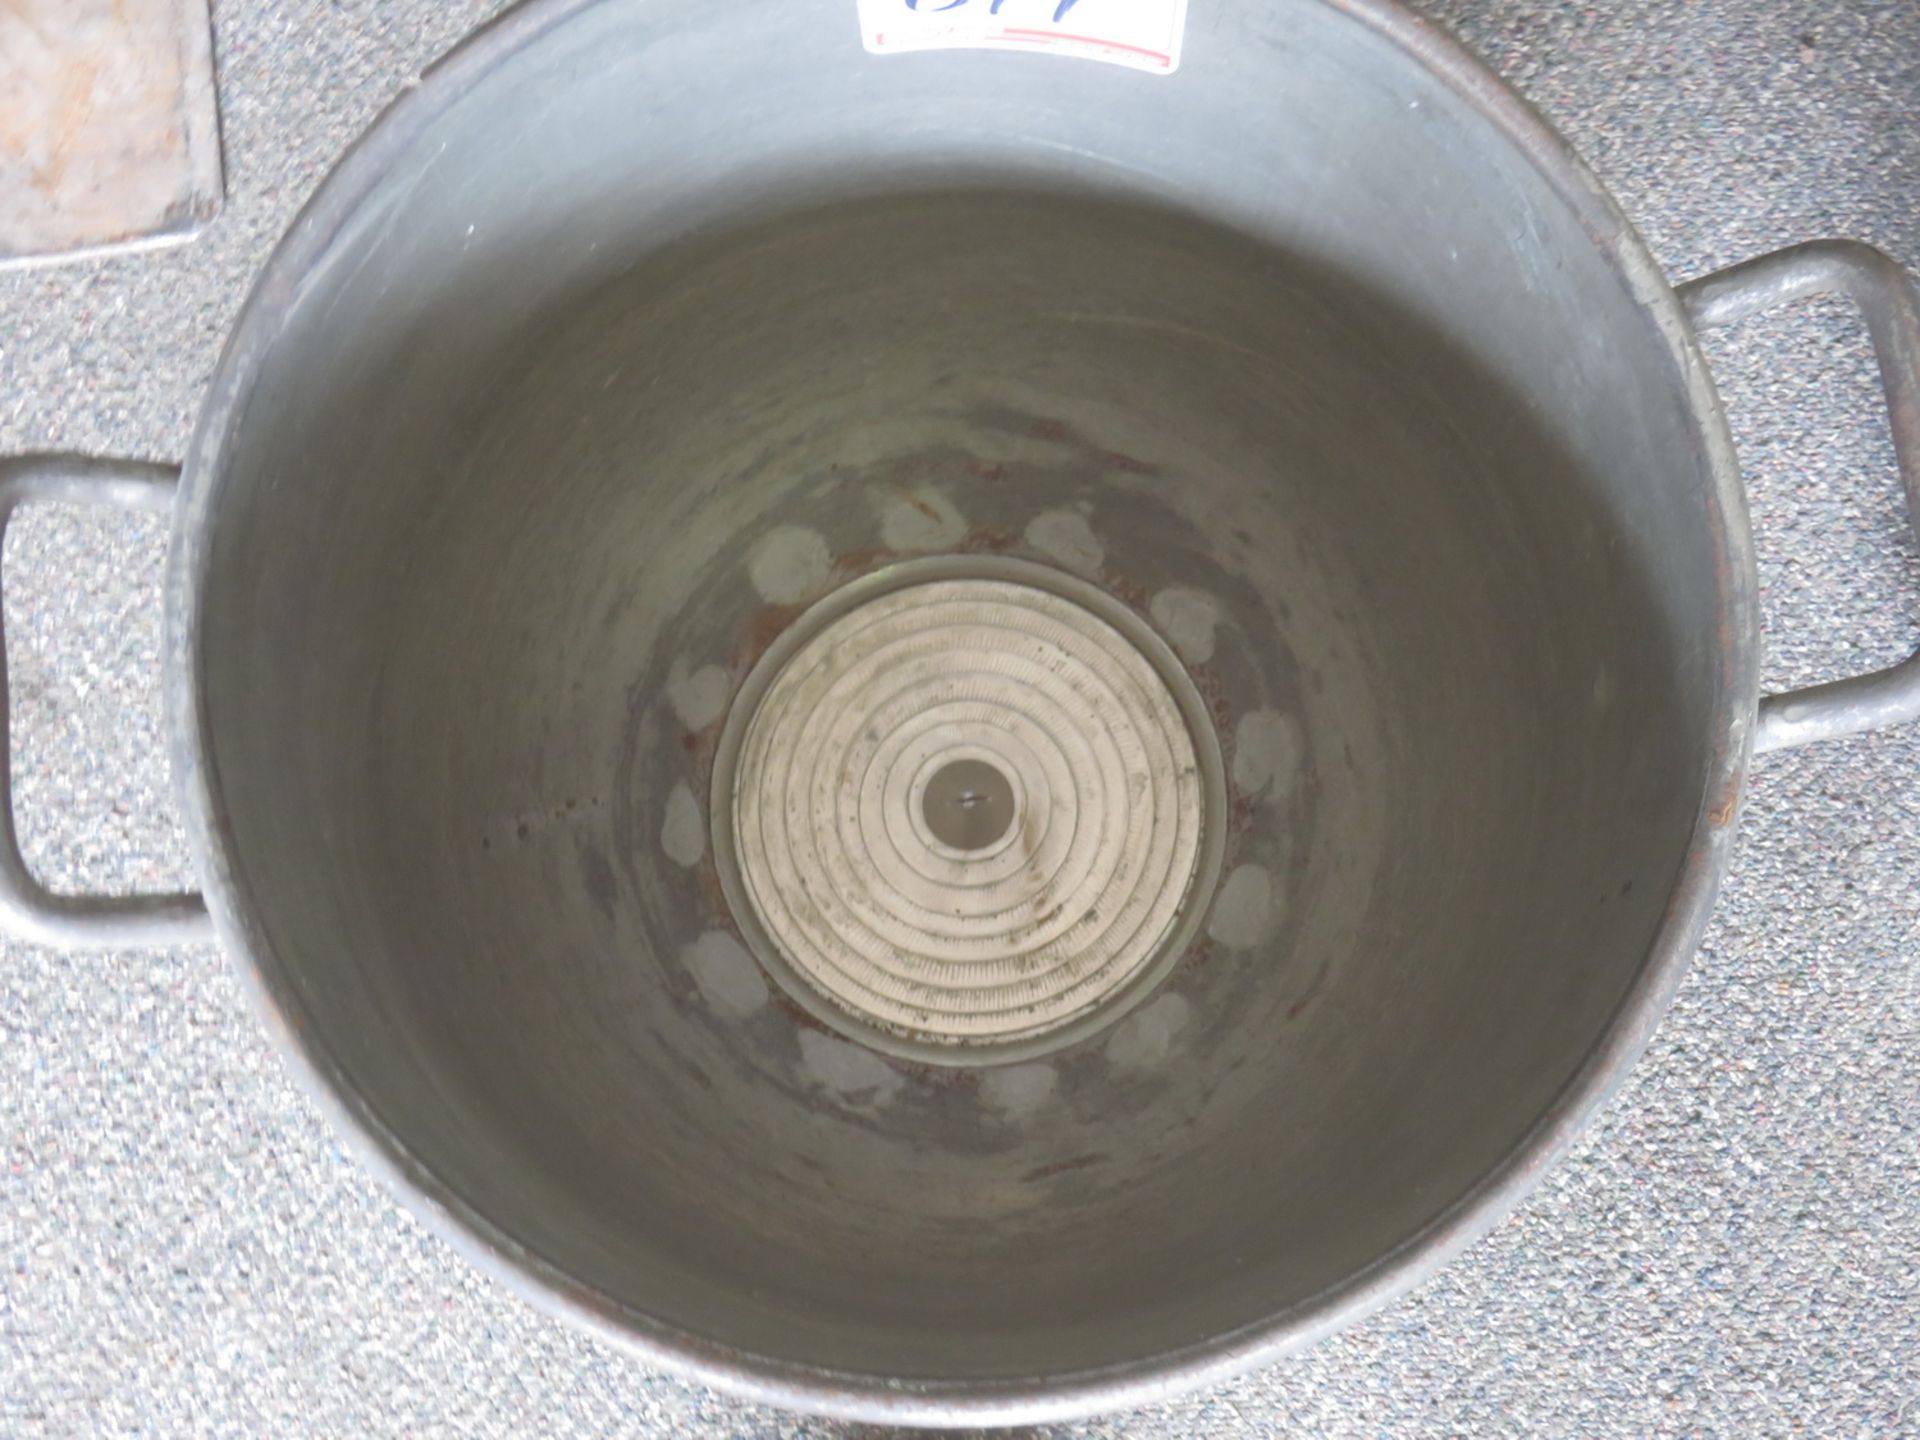 GENERAL APPR 14"ID X 13.5"H, 15.5" PIN MOUNT HOLES STEEL MIXING BOWLS - Image 2 of 2